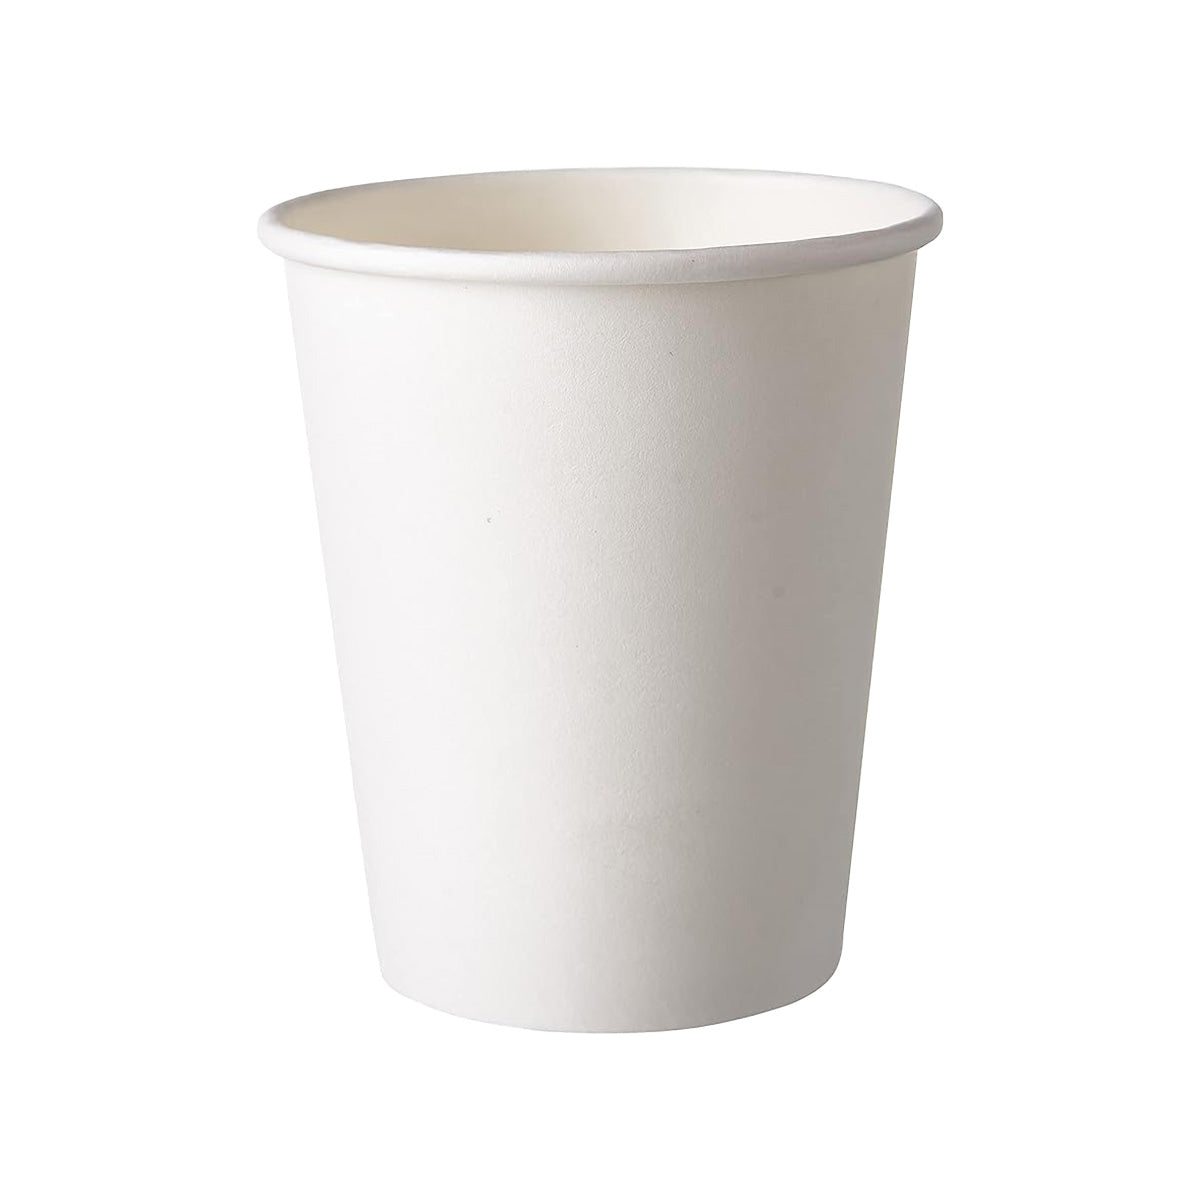 Ciao! Paper Hot Cup, 8 oz Disposable Cup, White, 1,000 Count